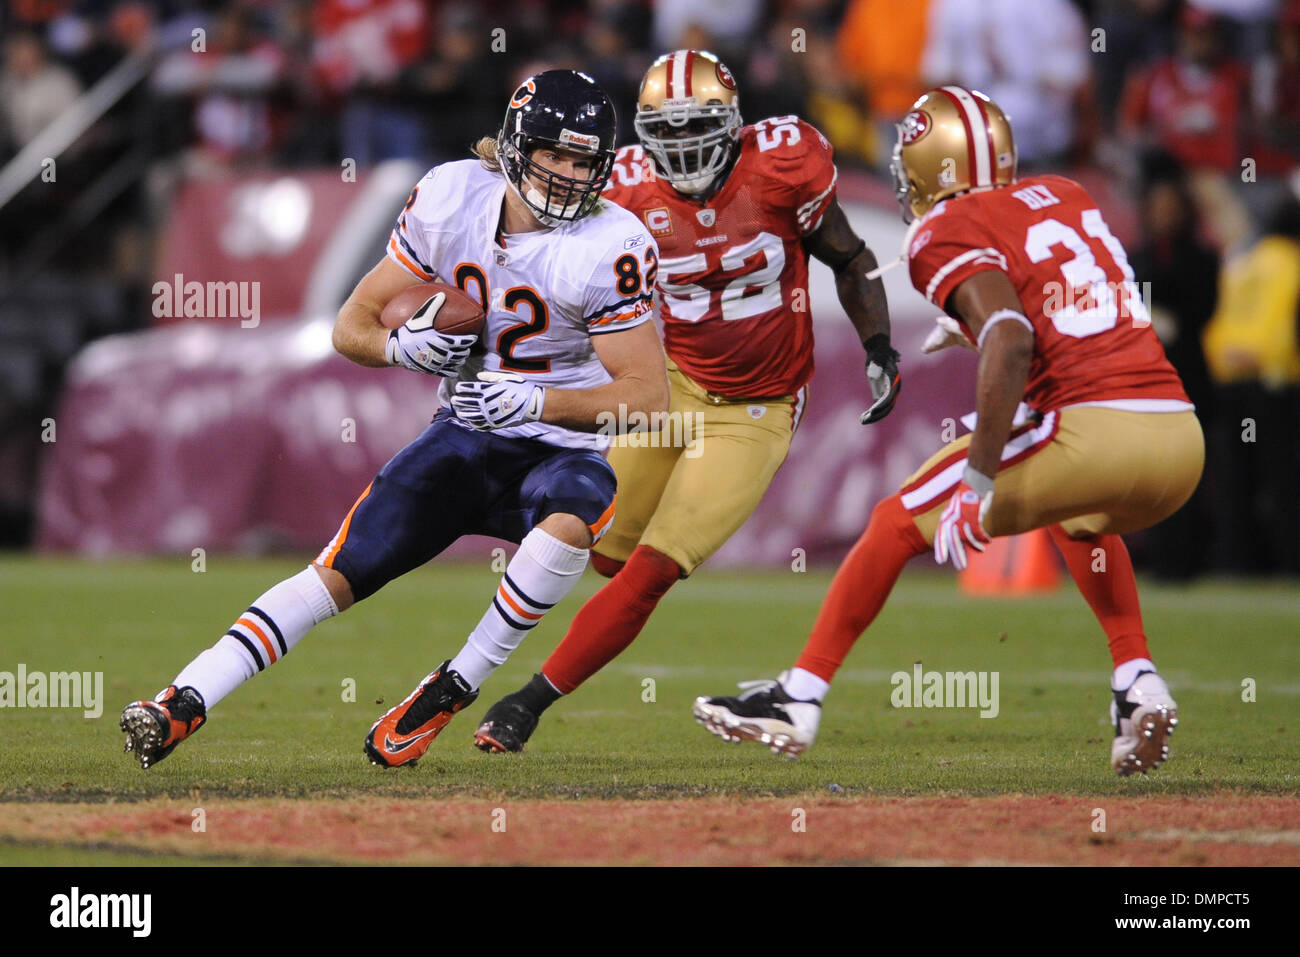 Nov. 12, 2009 - San Francisco, California, U.S - 12 Novemberber 2009: Chicago Bears tight end Greg Olsen (82) braces for a collission with San Francisco 49ers defensive back Dre' Bly (31) during the NFL football game between the Chicago Bears and San Francisco 49ers at Candlestick Park in San Francisco, California. (Credit Image: © Matt Cohen/Southcreek Global/ZUMApress.com) Stock Photo